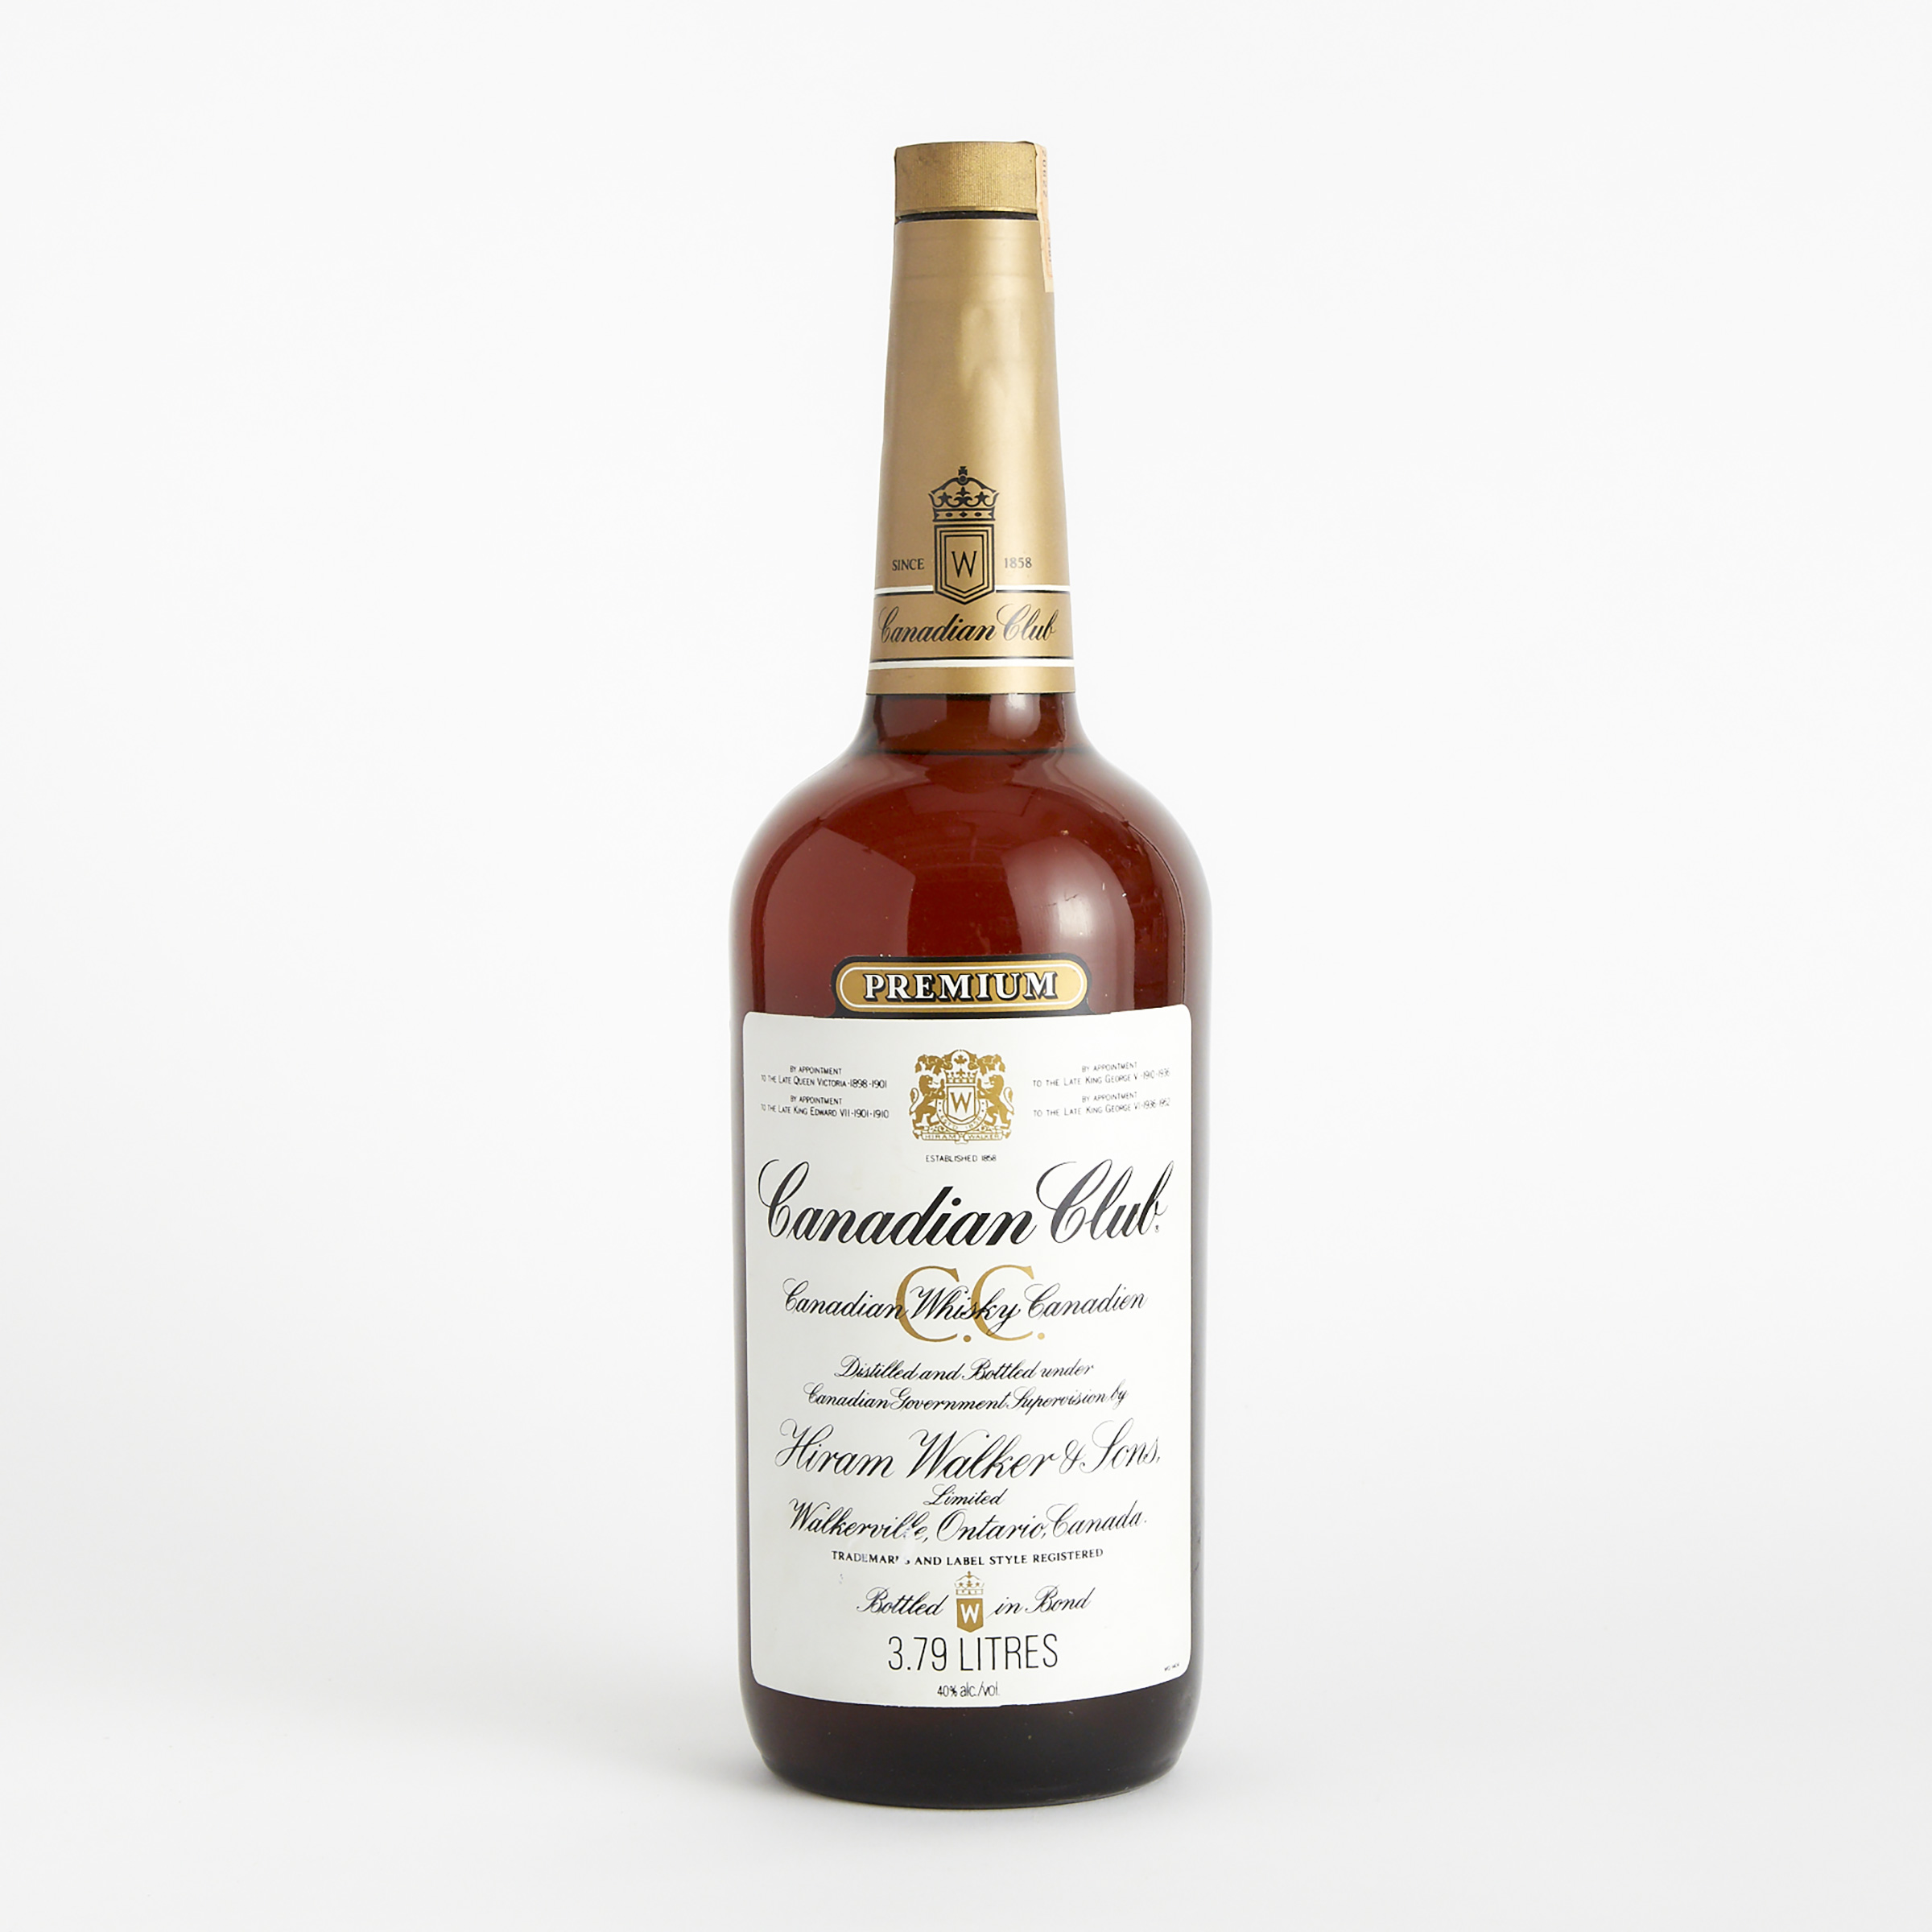 CANADIAN CLUB PREMIUM CANADIAN WHISKY NAS (ONE 3.79 L)